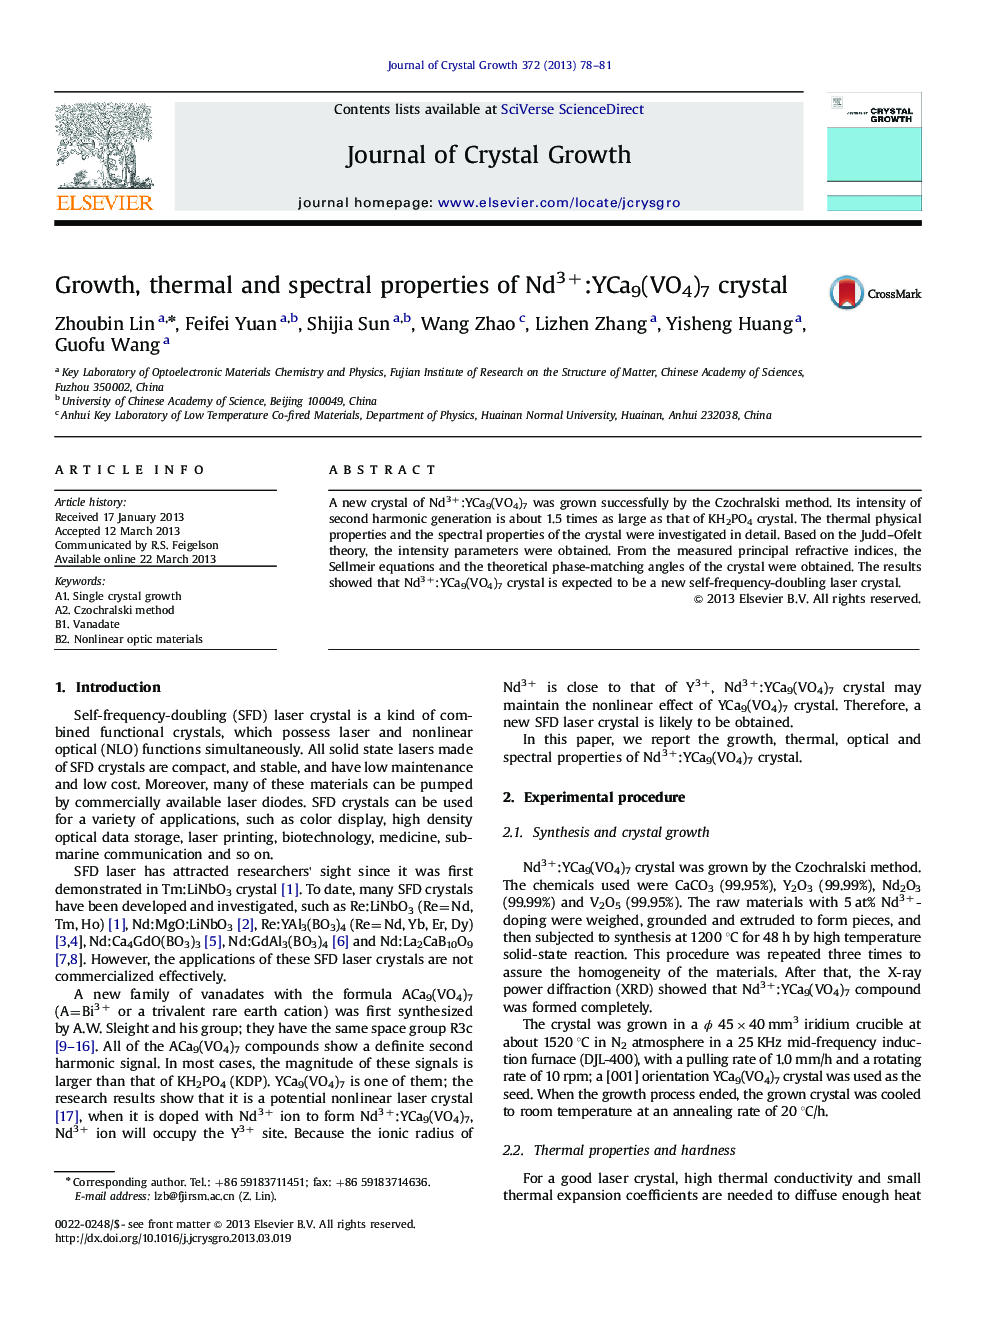 Growth, thermal and spectral properties of Nd3+:YCa9(VO4)7 crystal